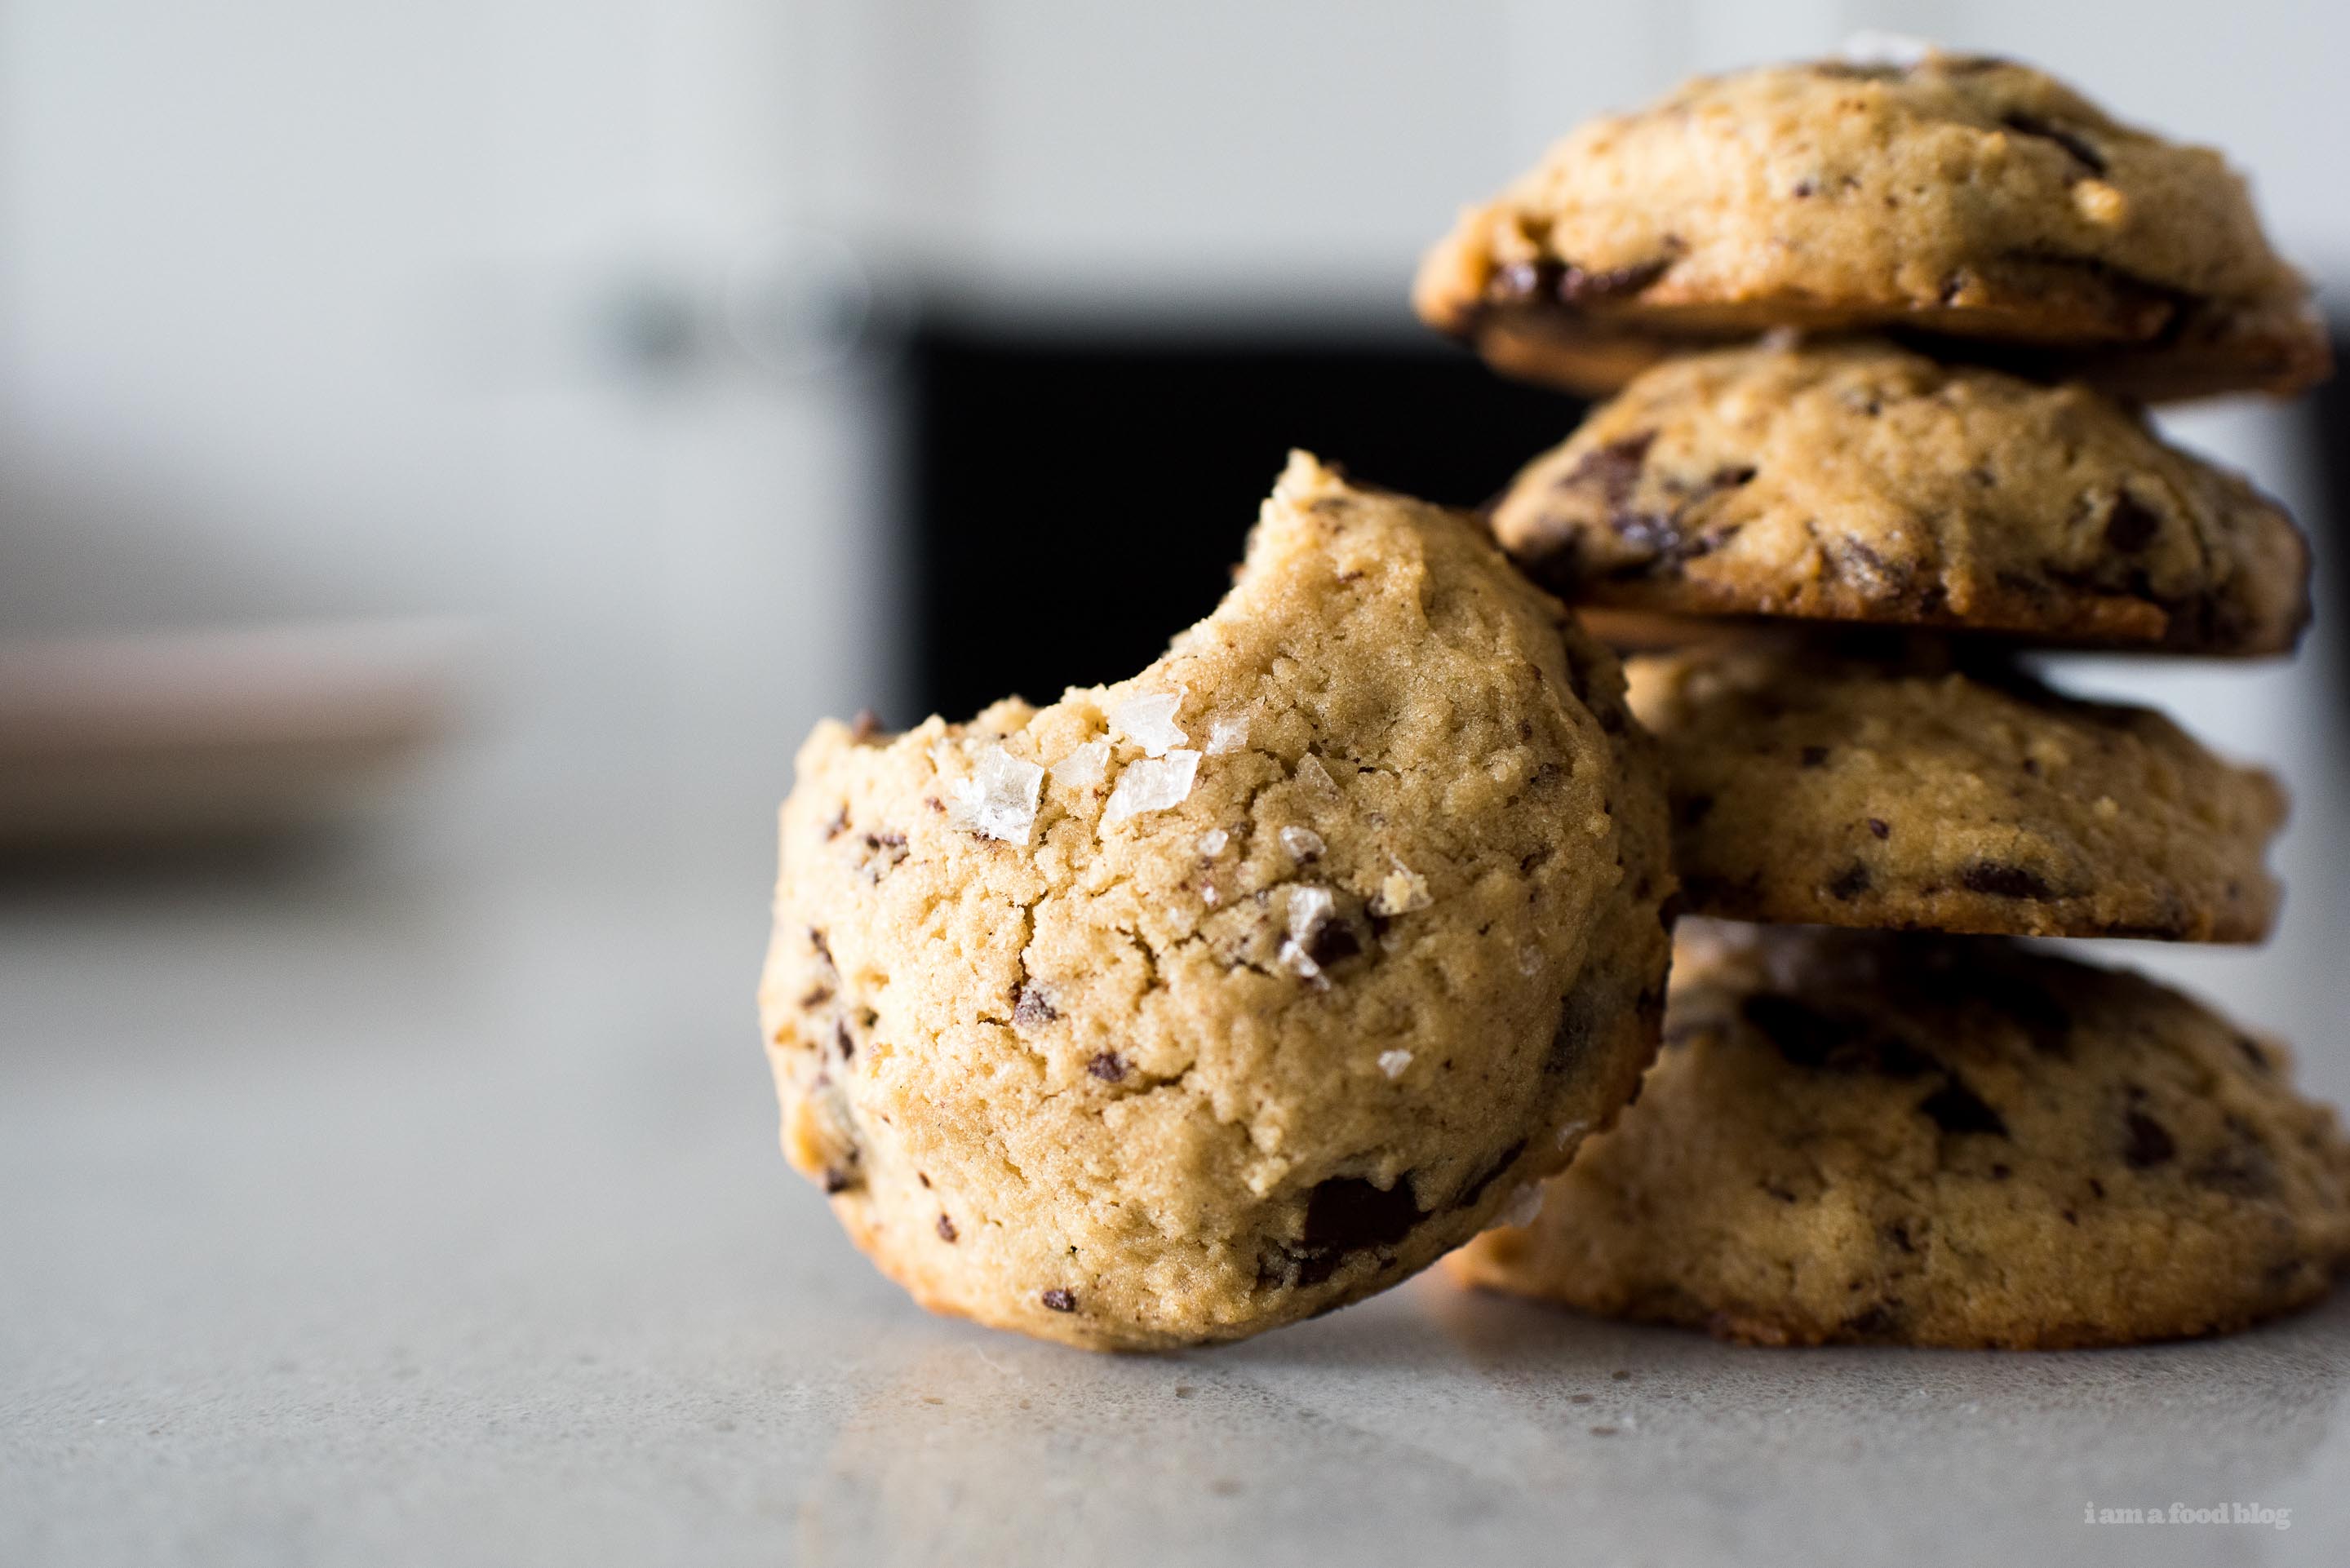 A Classic Chocolate Chip Cookie with a Cardamom Twist: Cardamom Chocolate Chip Cookies